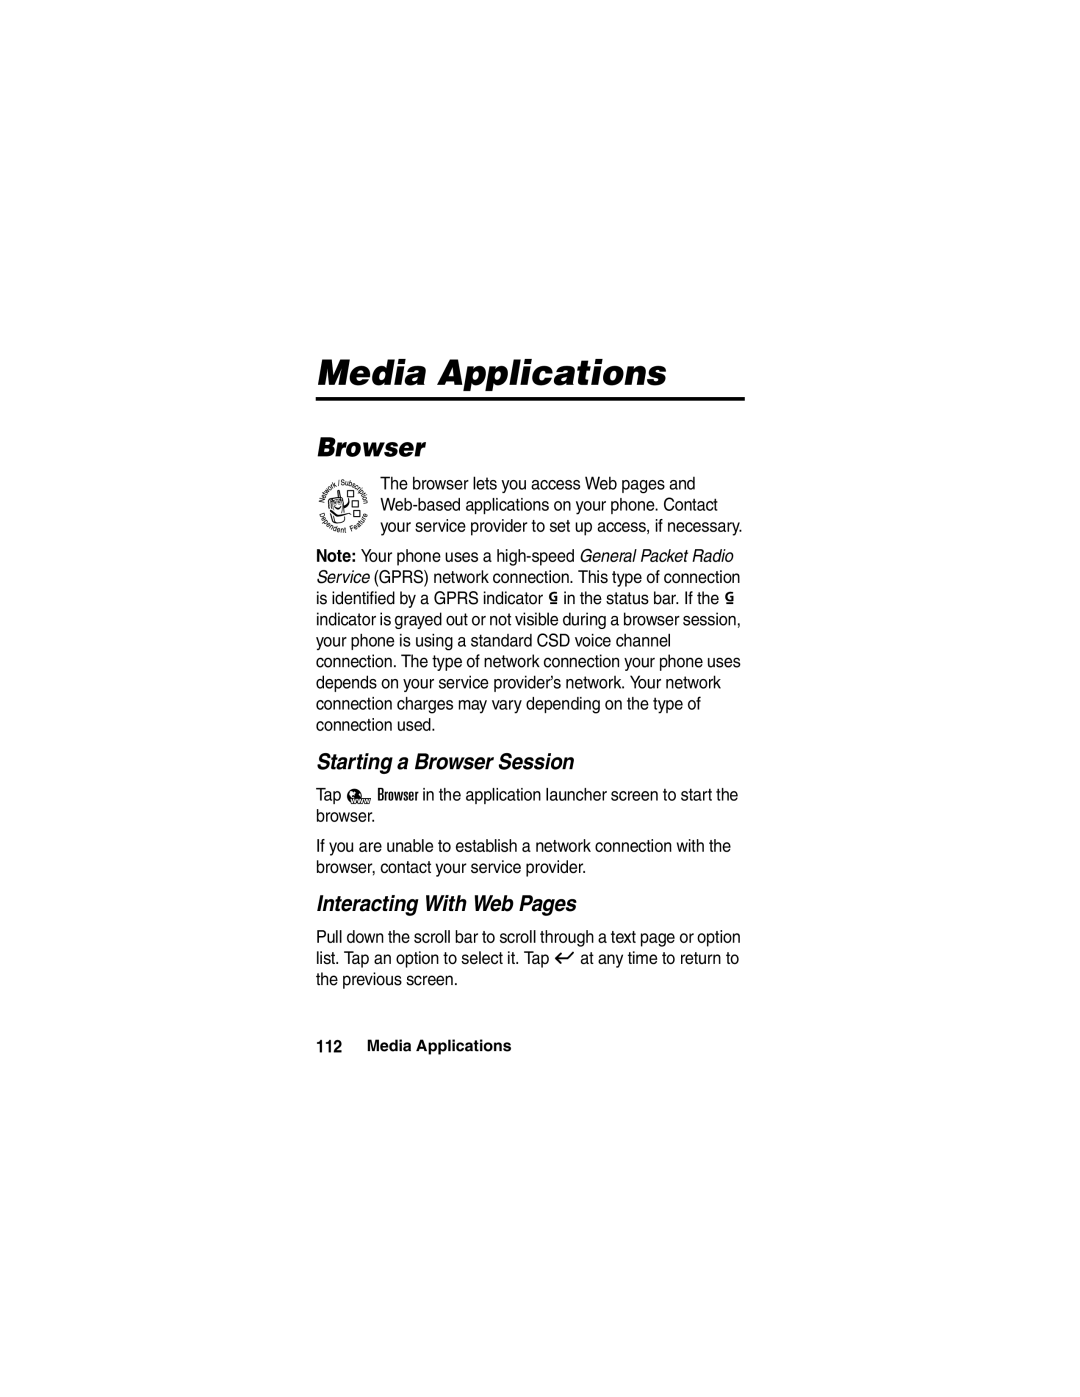 Motorola A780 manual Media Applications, Starting a Browser Session, Interacting With Web Pages 